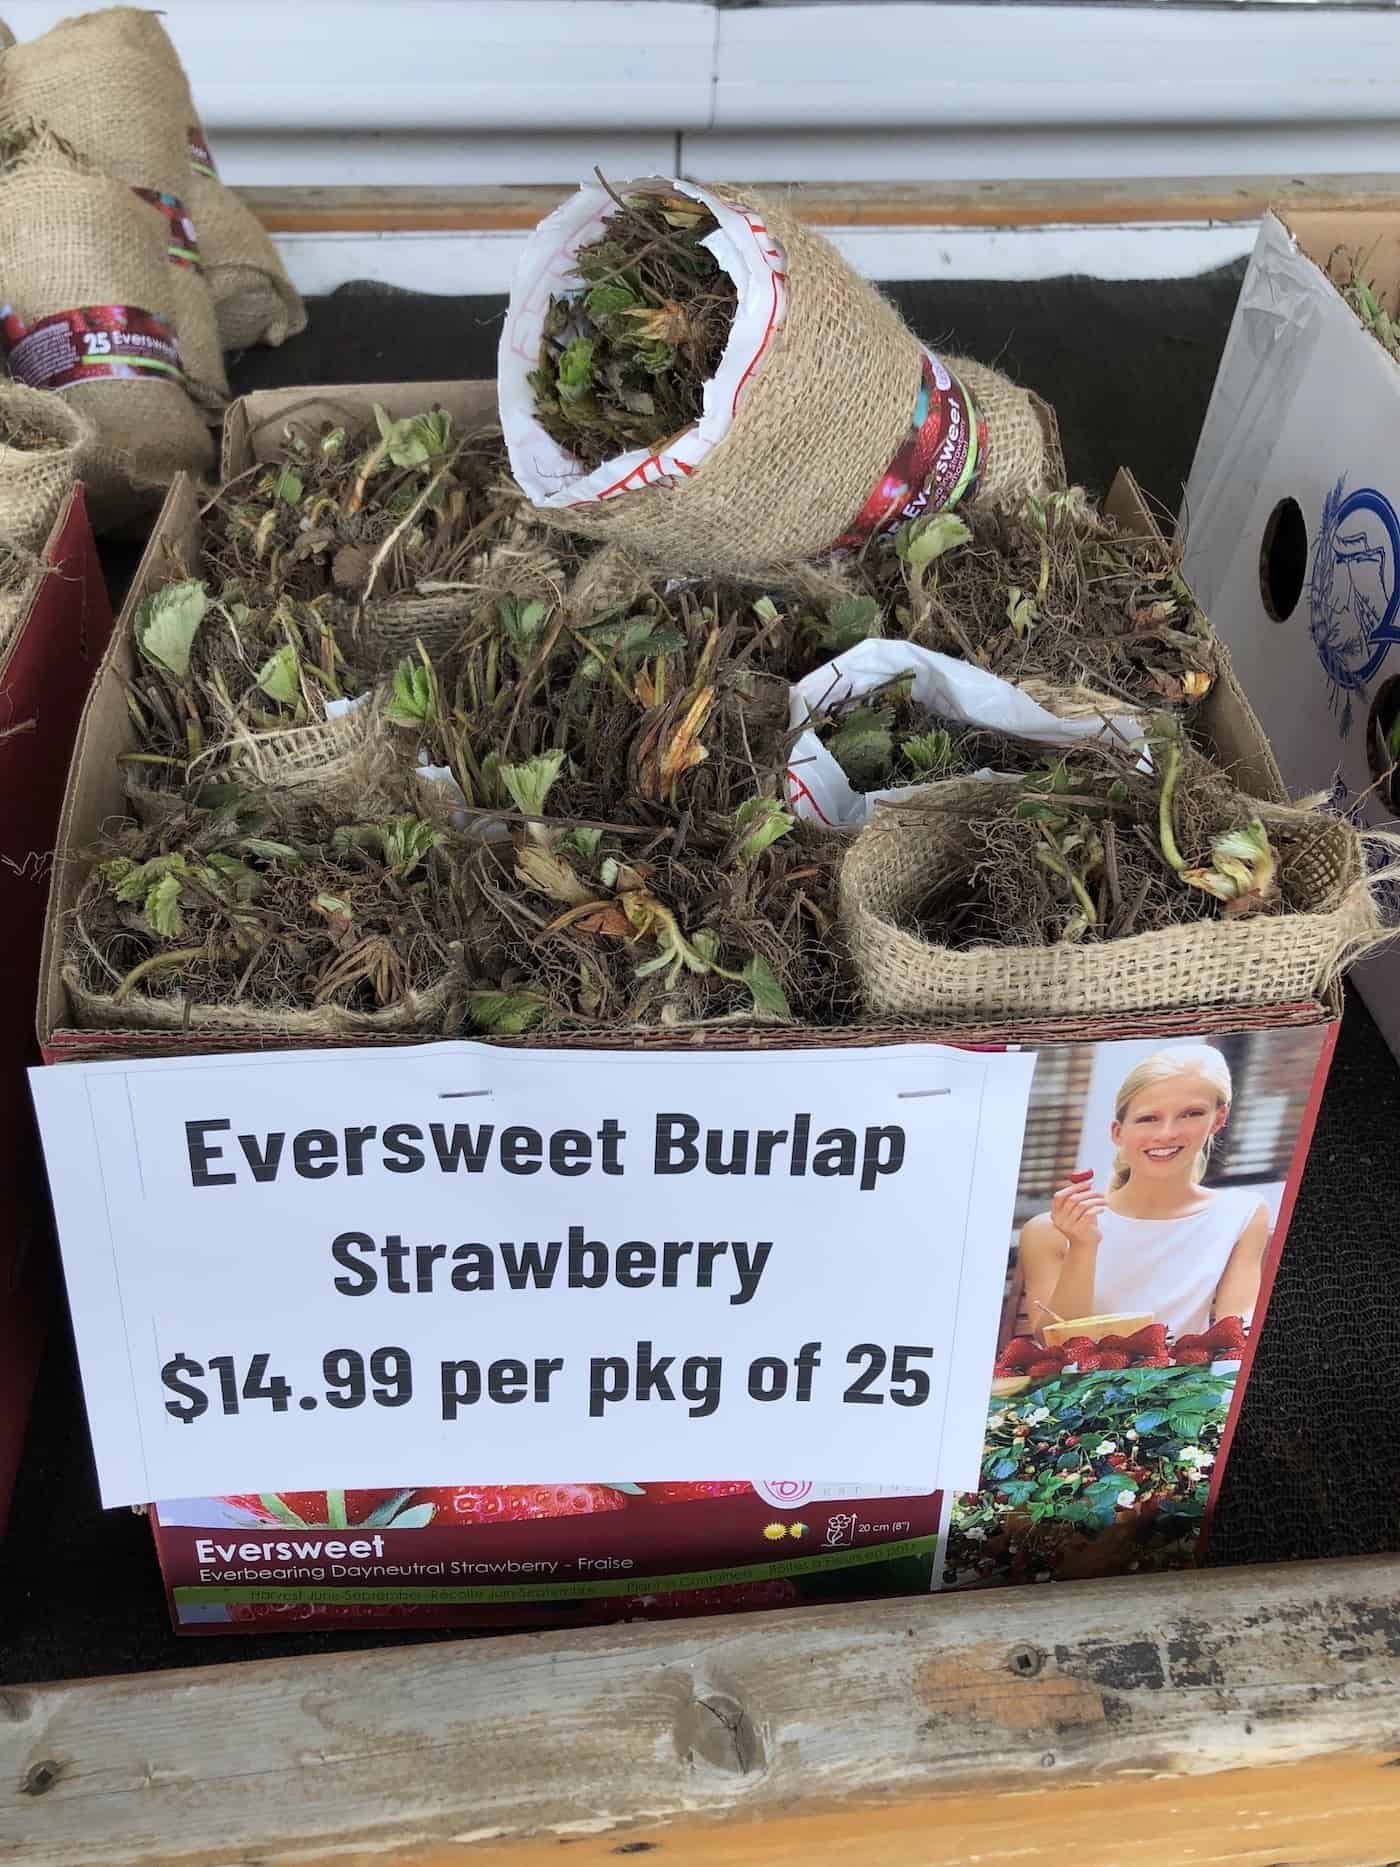 Eversweet strawberry bare root plants